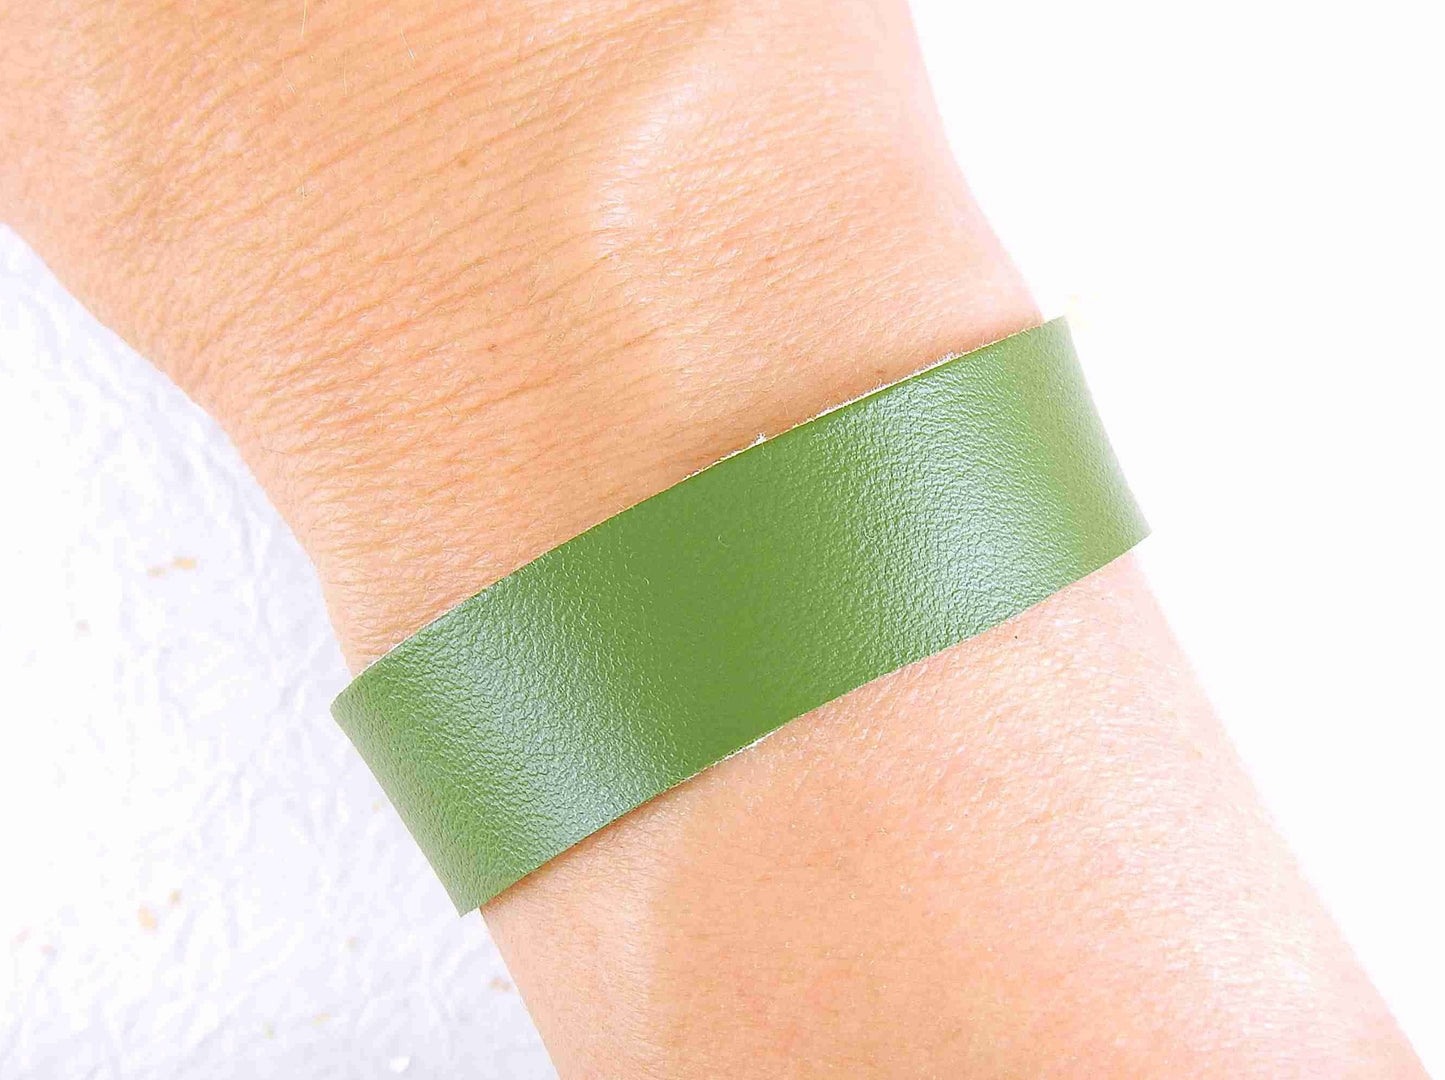 Simple 15mm cactus leather bracelet in 3 colours (apple green, tan, black), magnetic stainless steel clasp